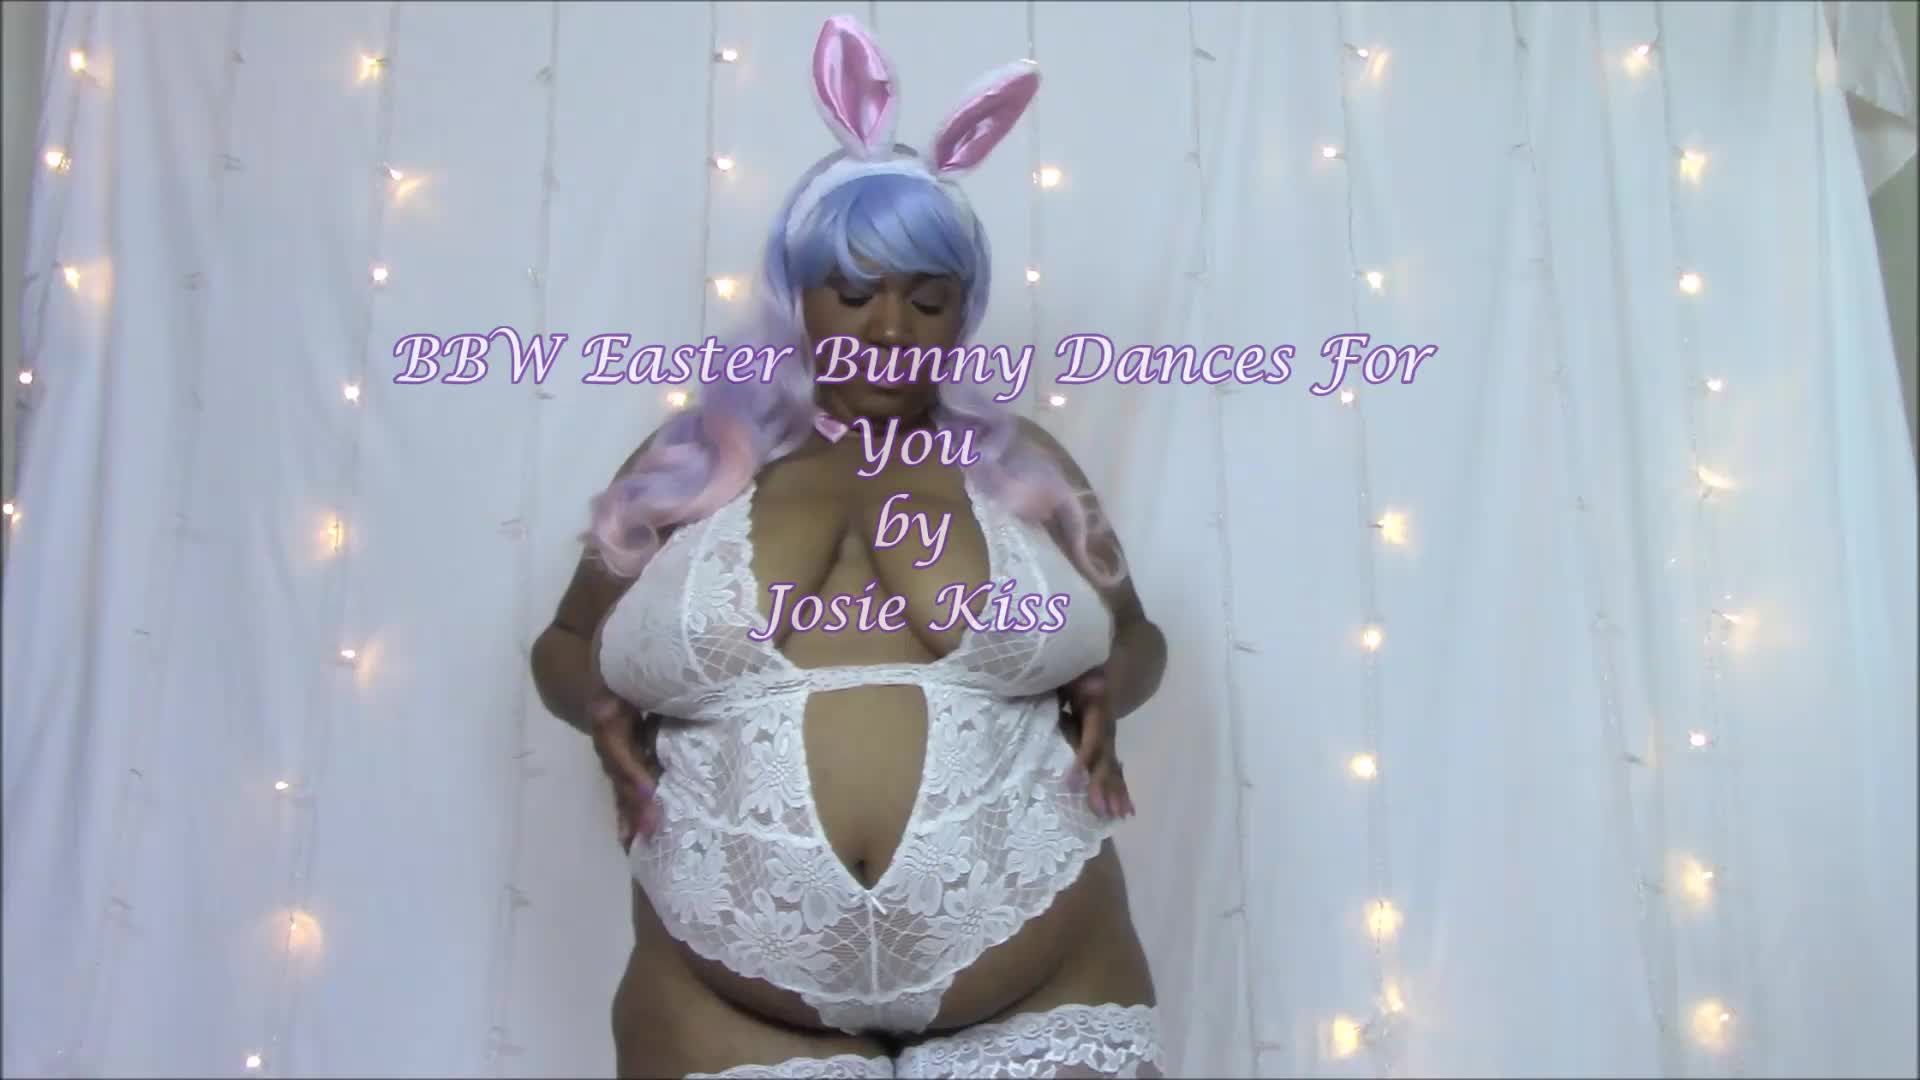 BBW Easter Bunny Dances For You HD MP4